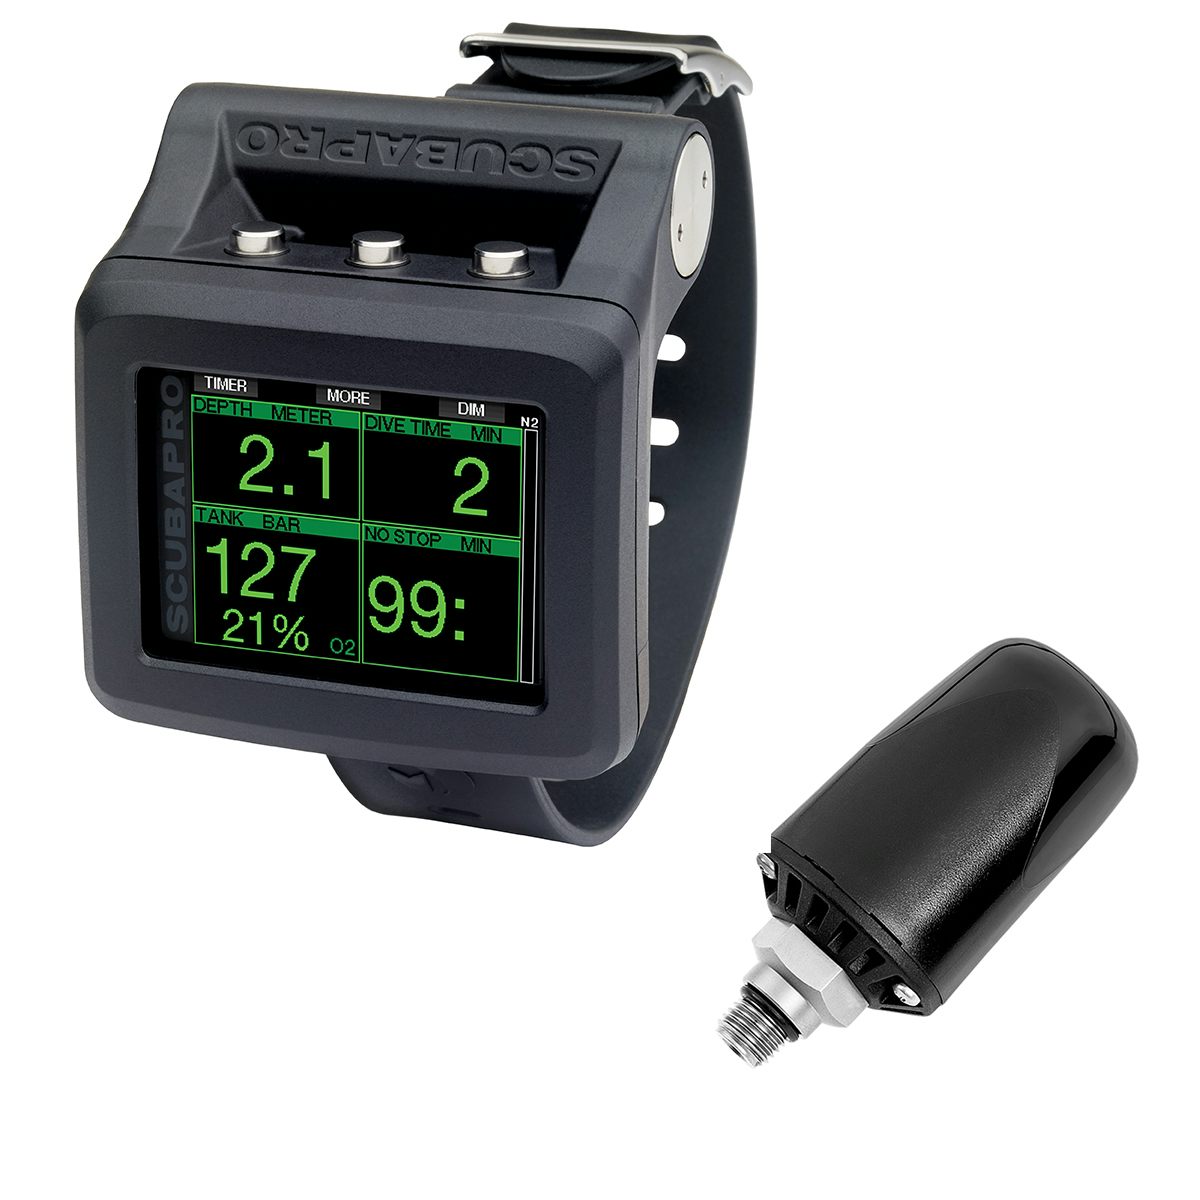 ScubaPro G2 Wrist Dive Computer with Transmitter